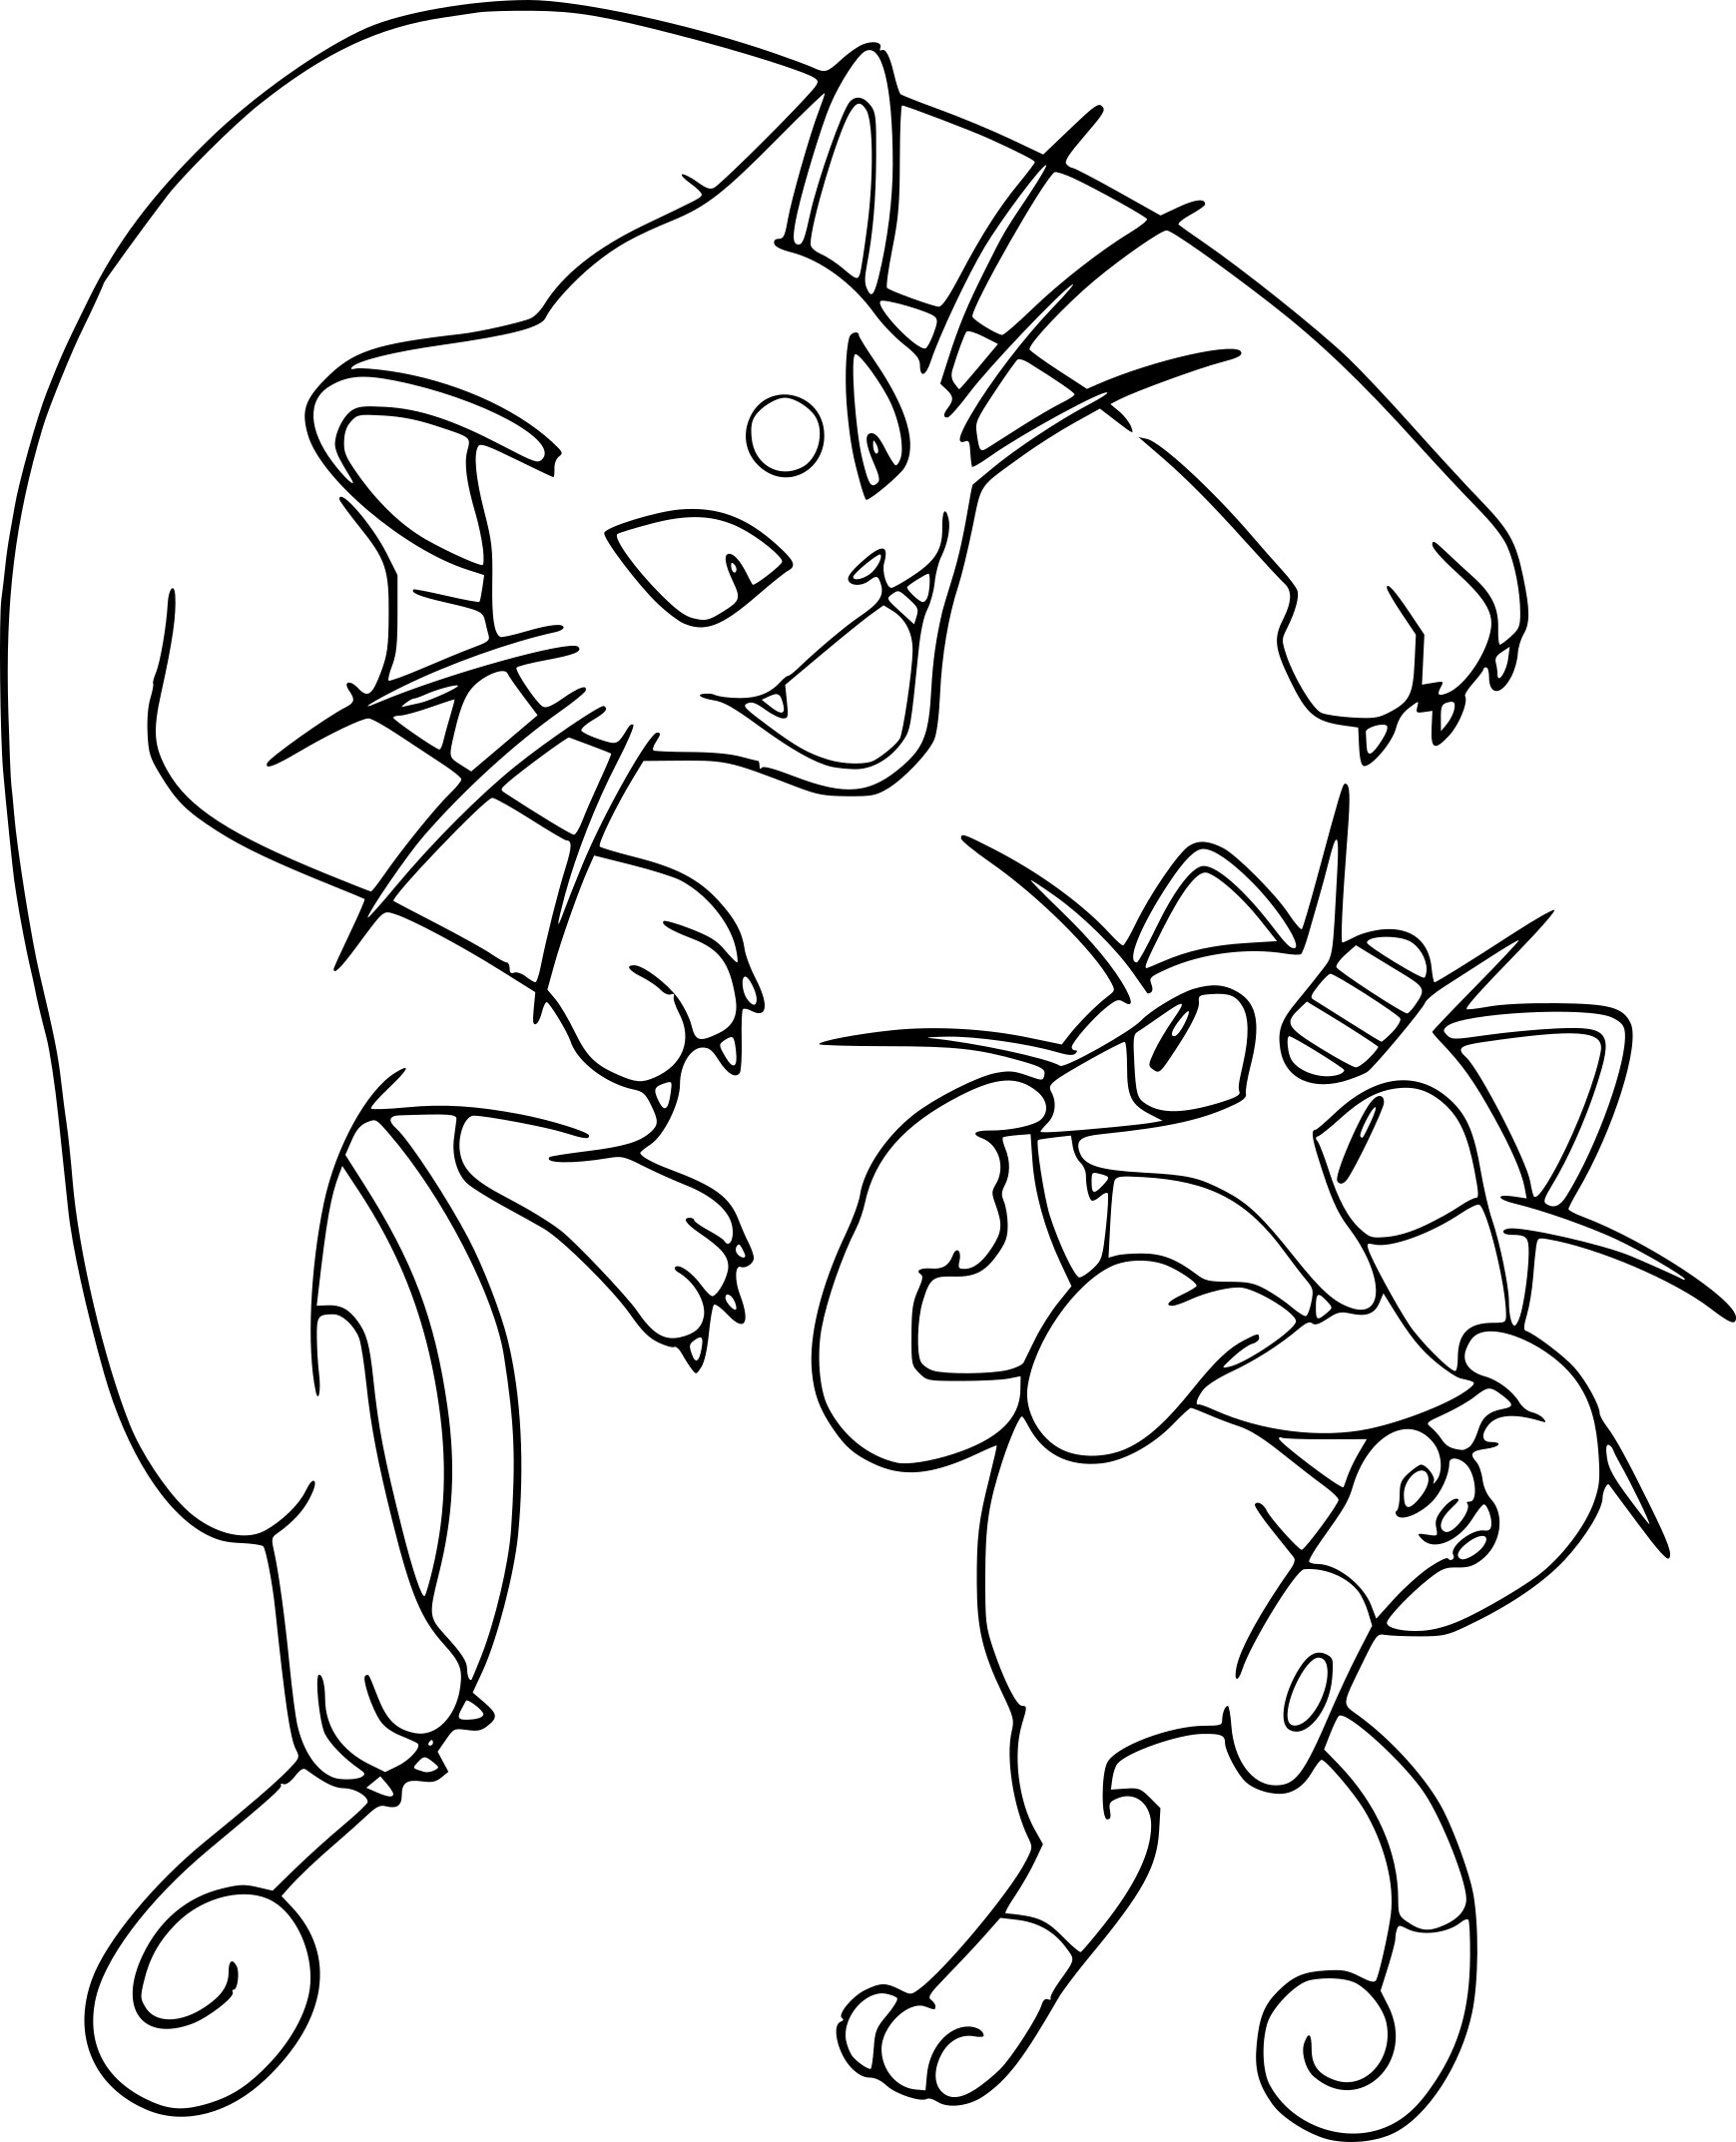 Meowth And Persian Pokemon coloring page